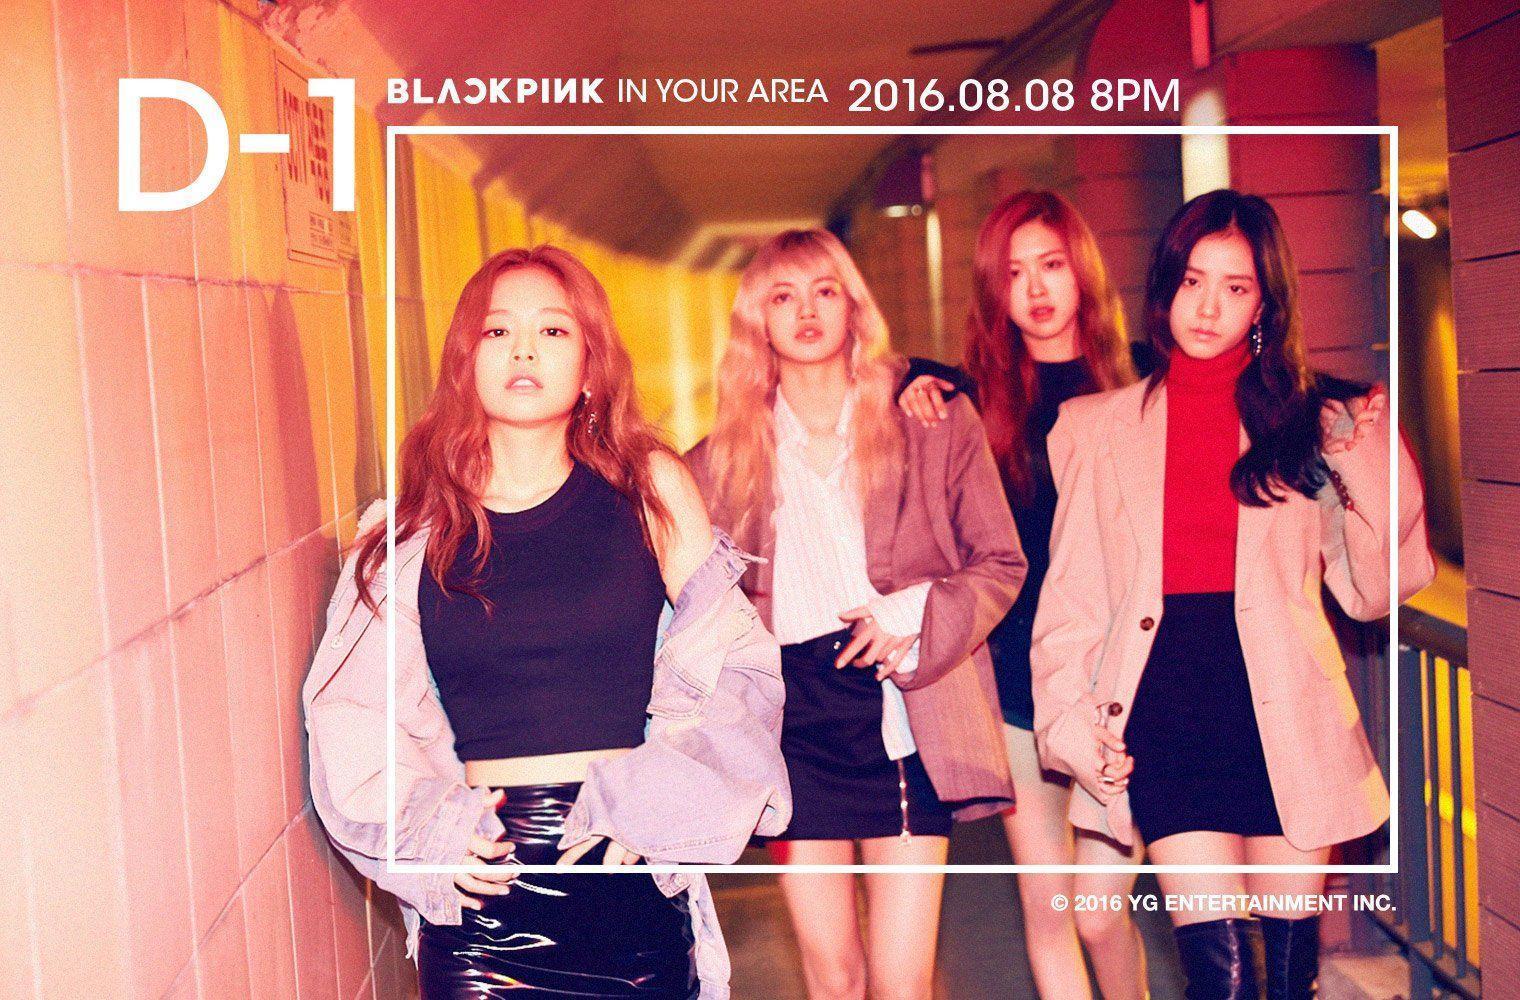 Other Share with me some HD Blackpink Wallpaper